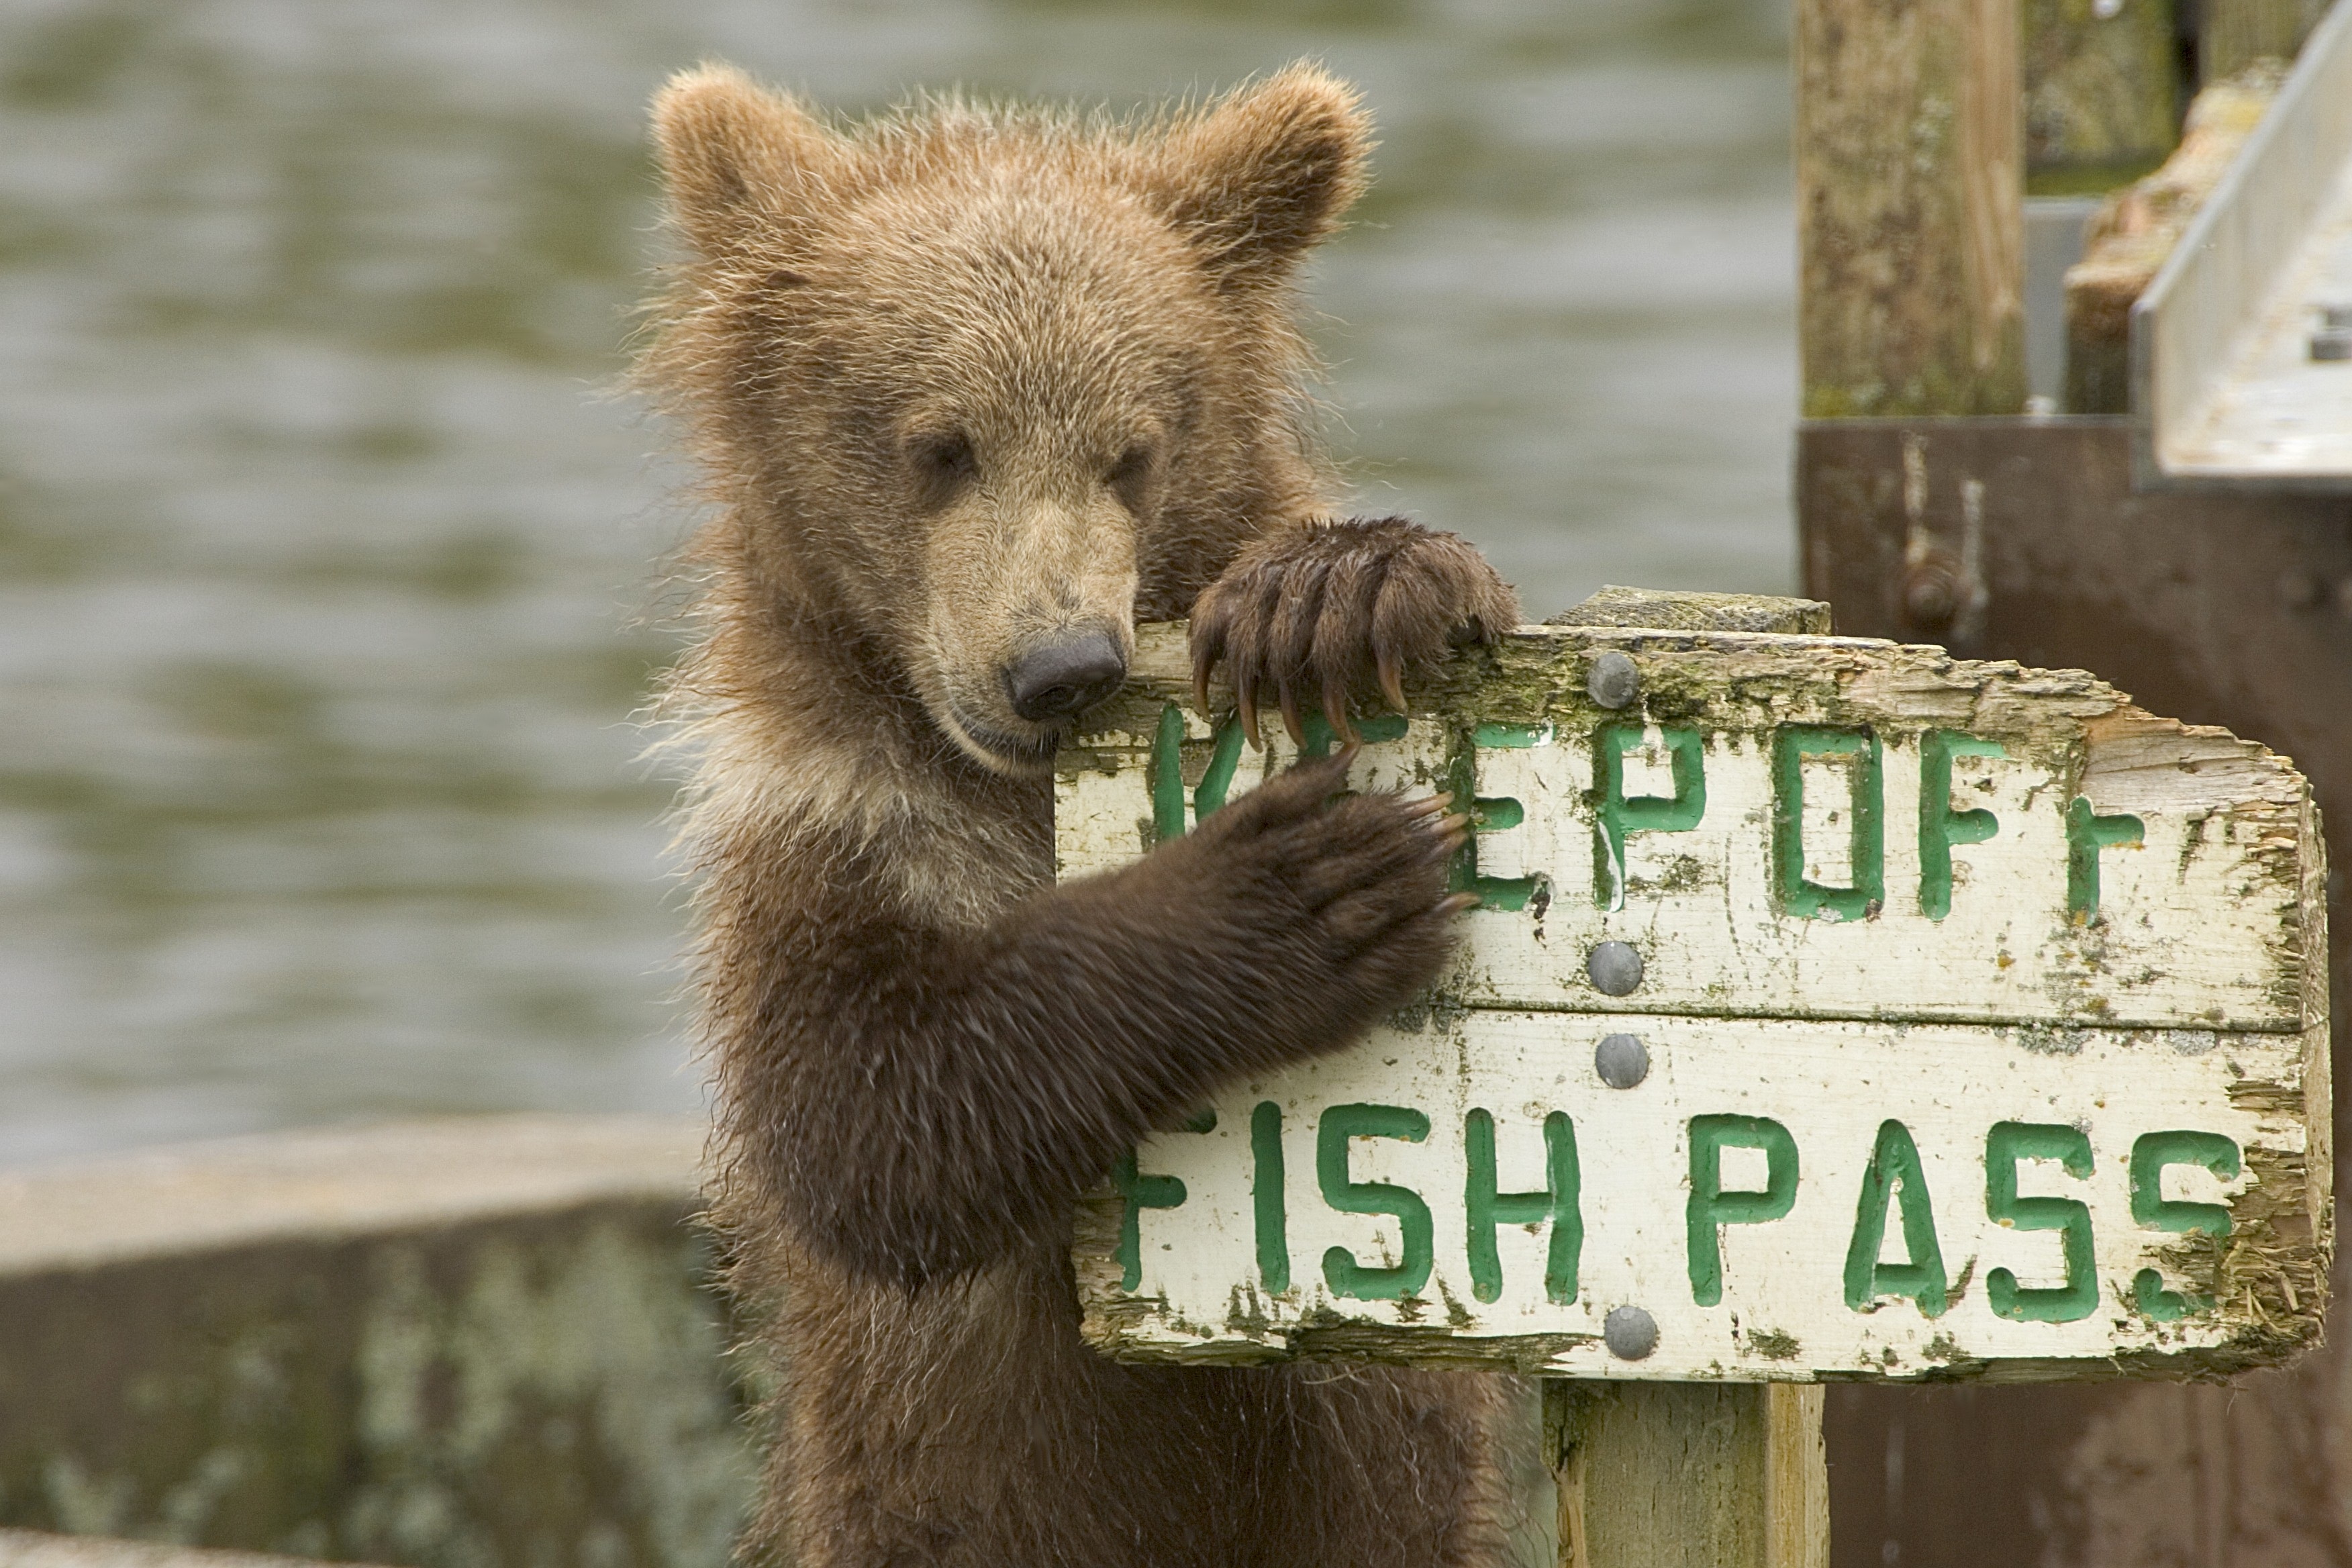 The bear cub is chewing on the sign